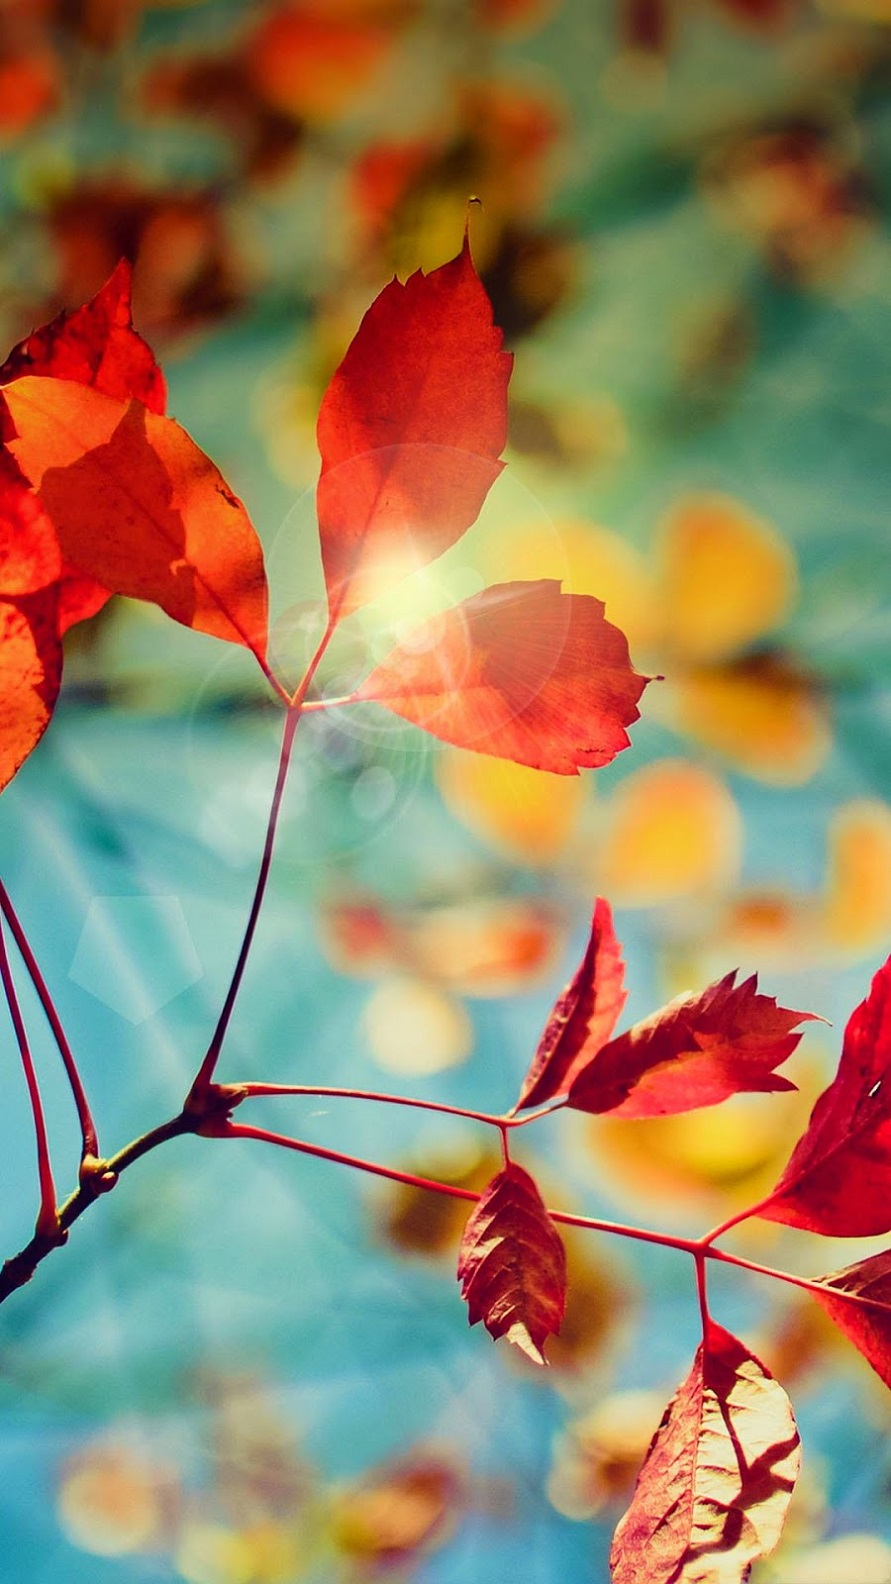 autumn wallpaper for android,leaf,nature,red,plant,flower